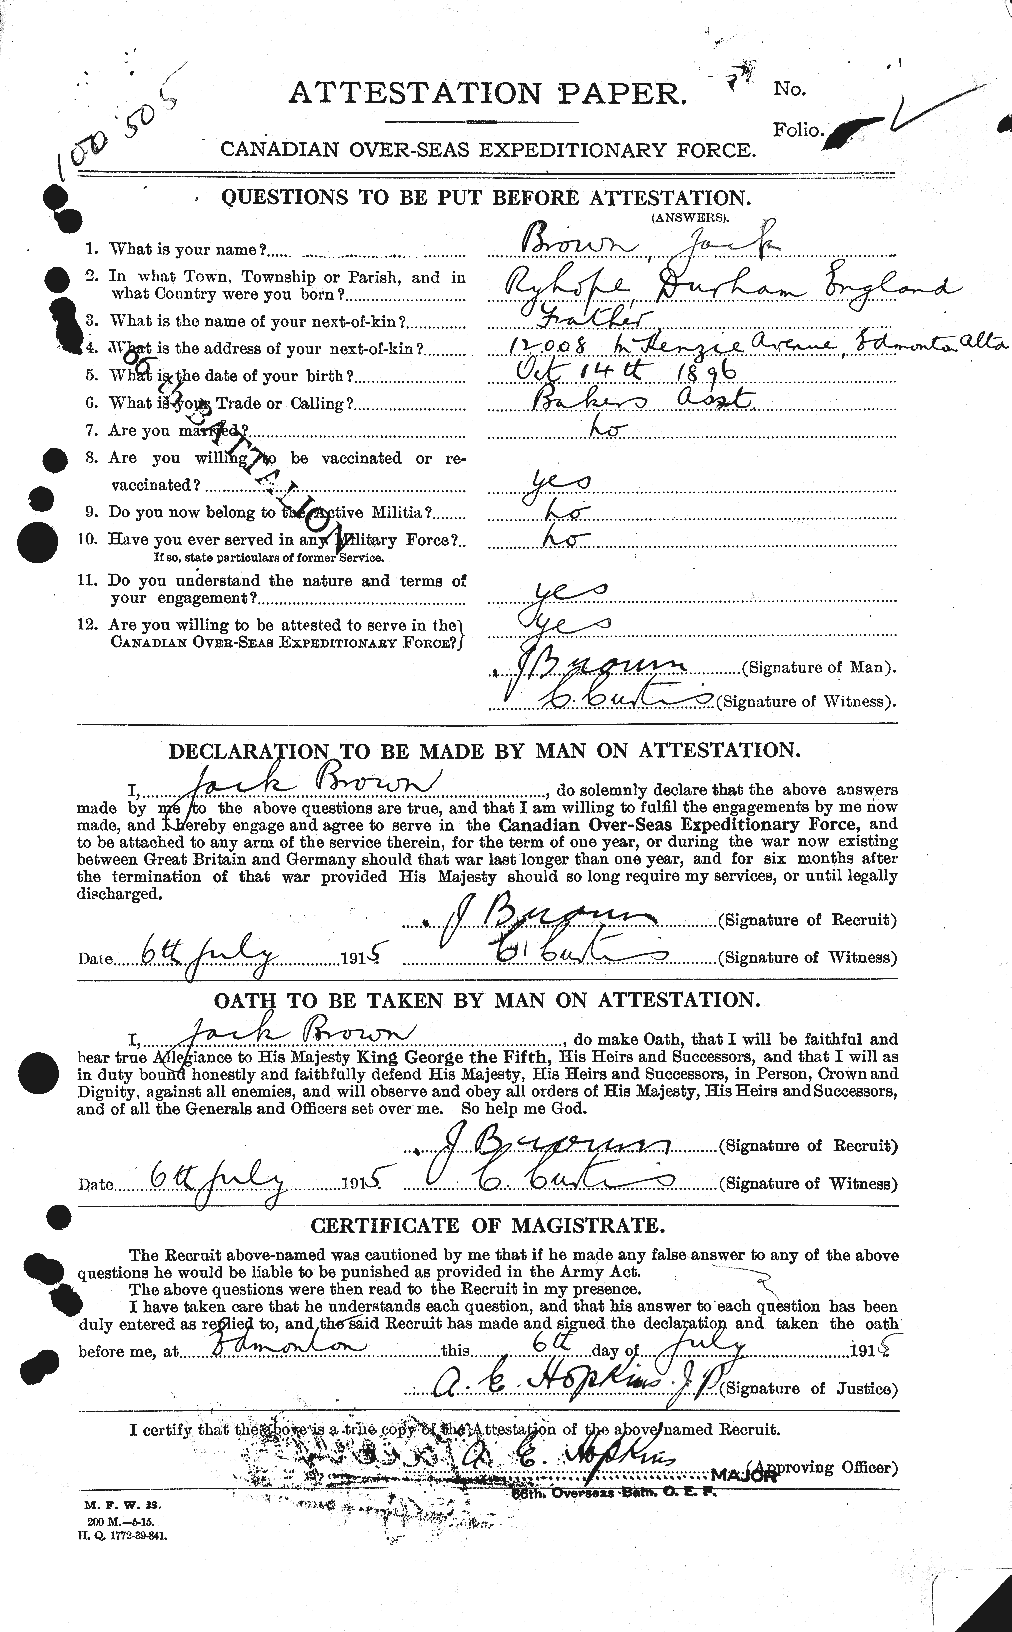 Personnel Records of the First World War - CEF 265681a